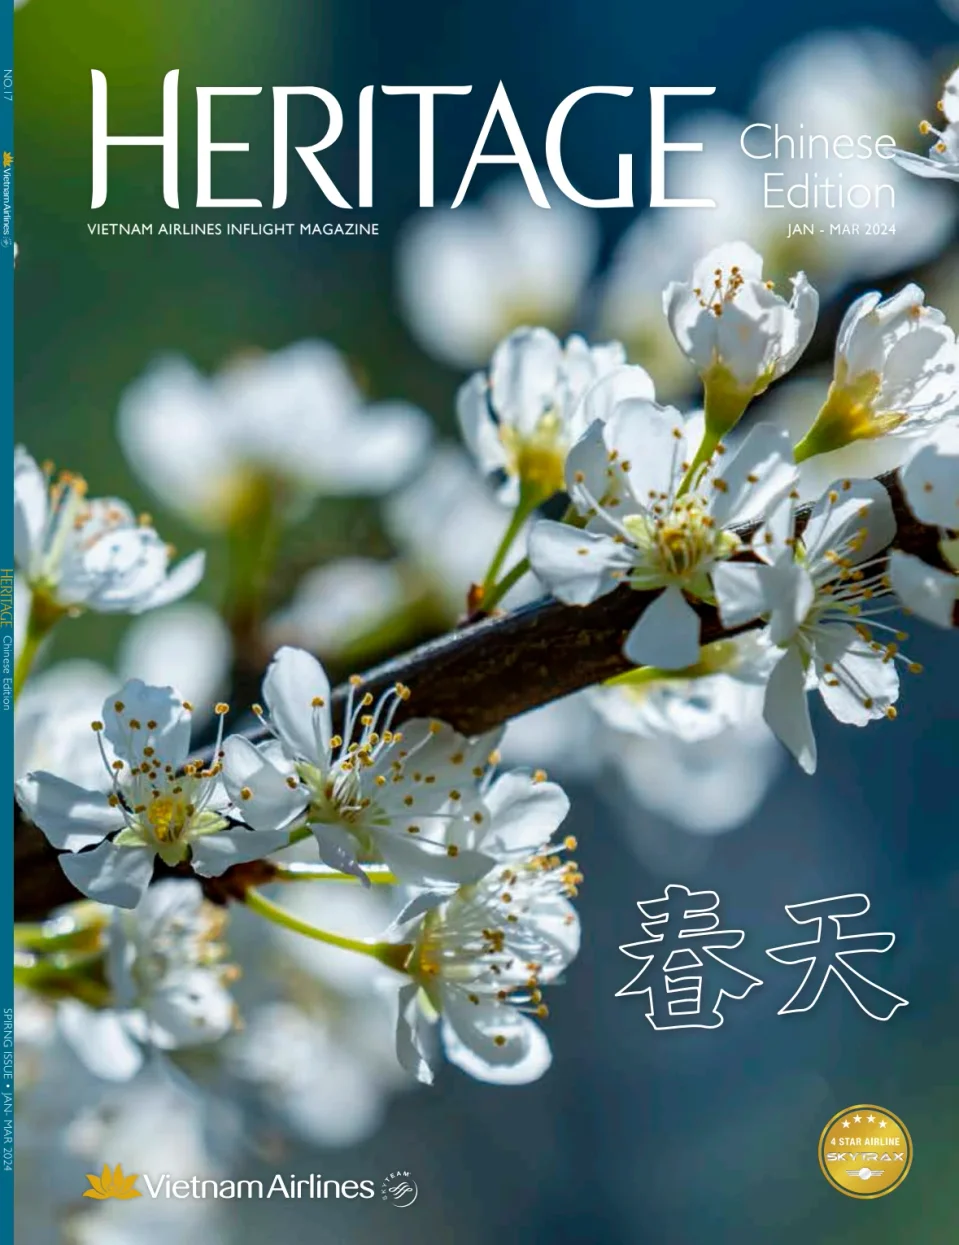 Heritage Chinese Edition 